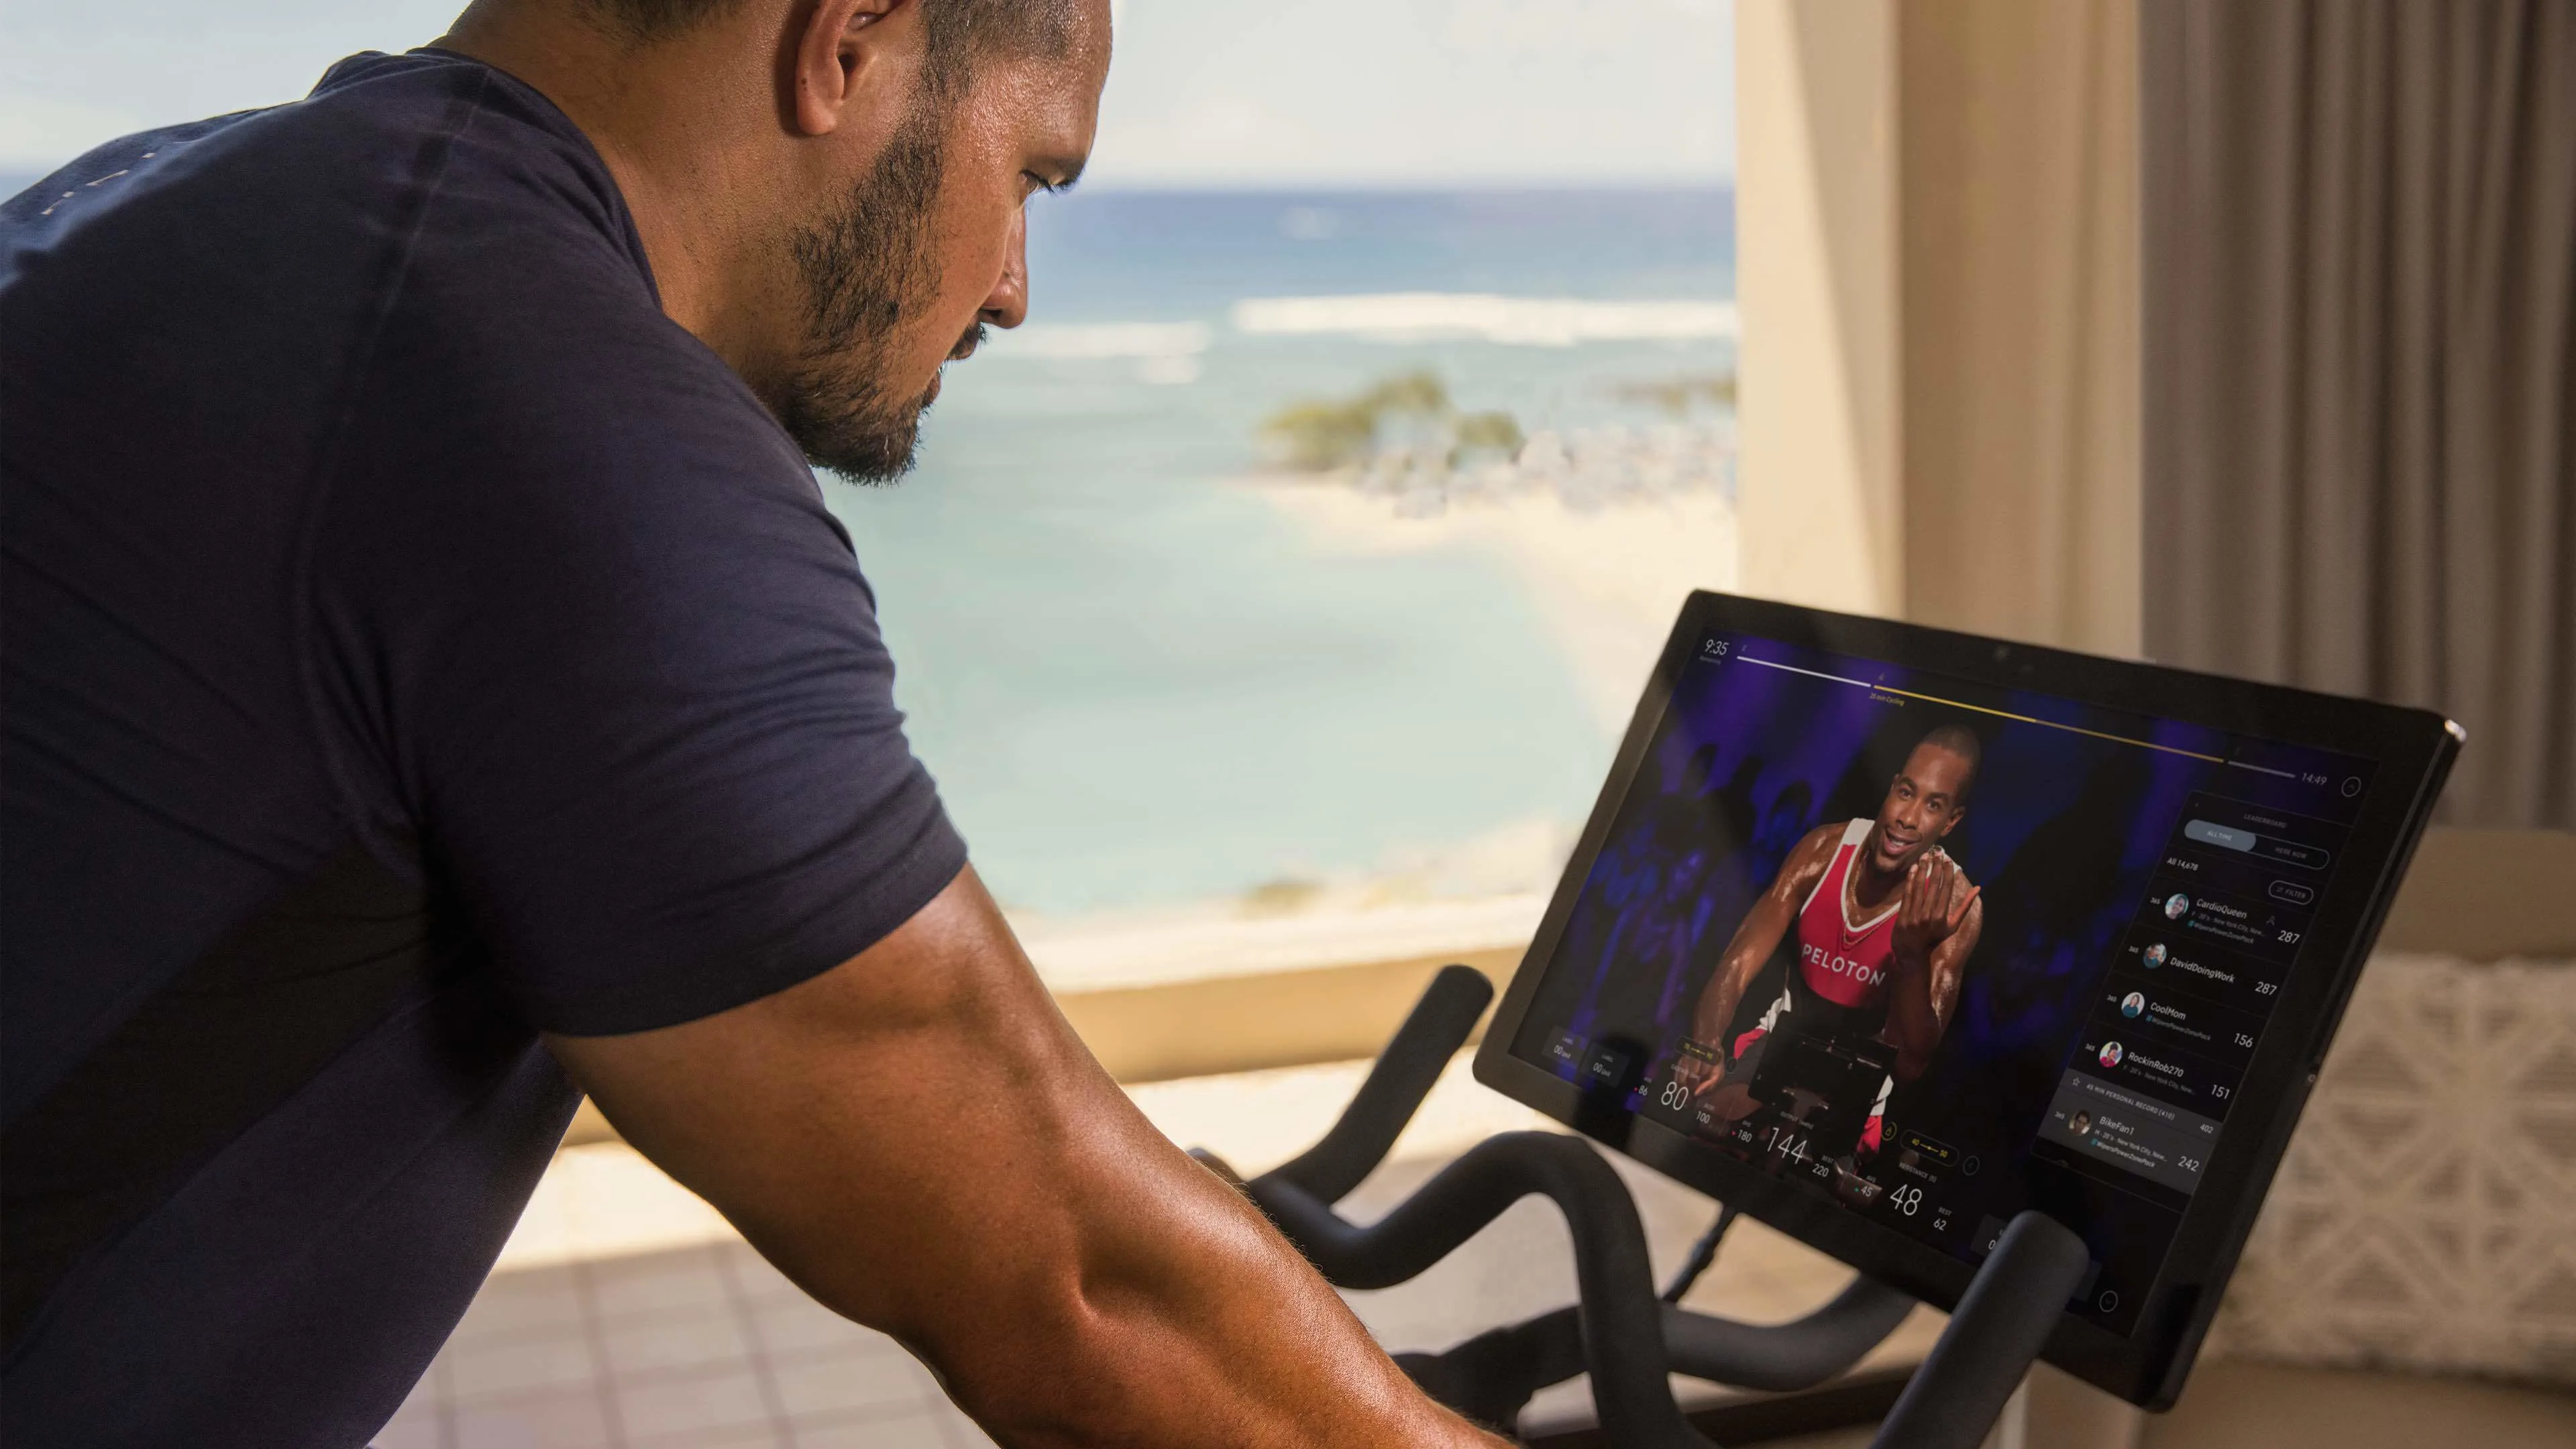 Exerciser using a Peloton stationary bike at a hotel in Hawaii